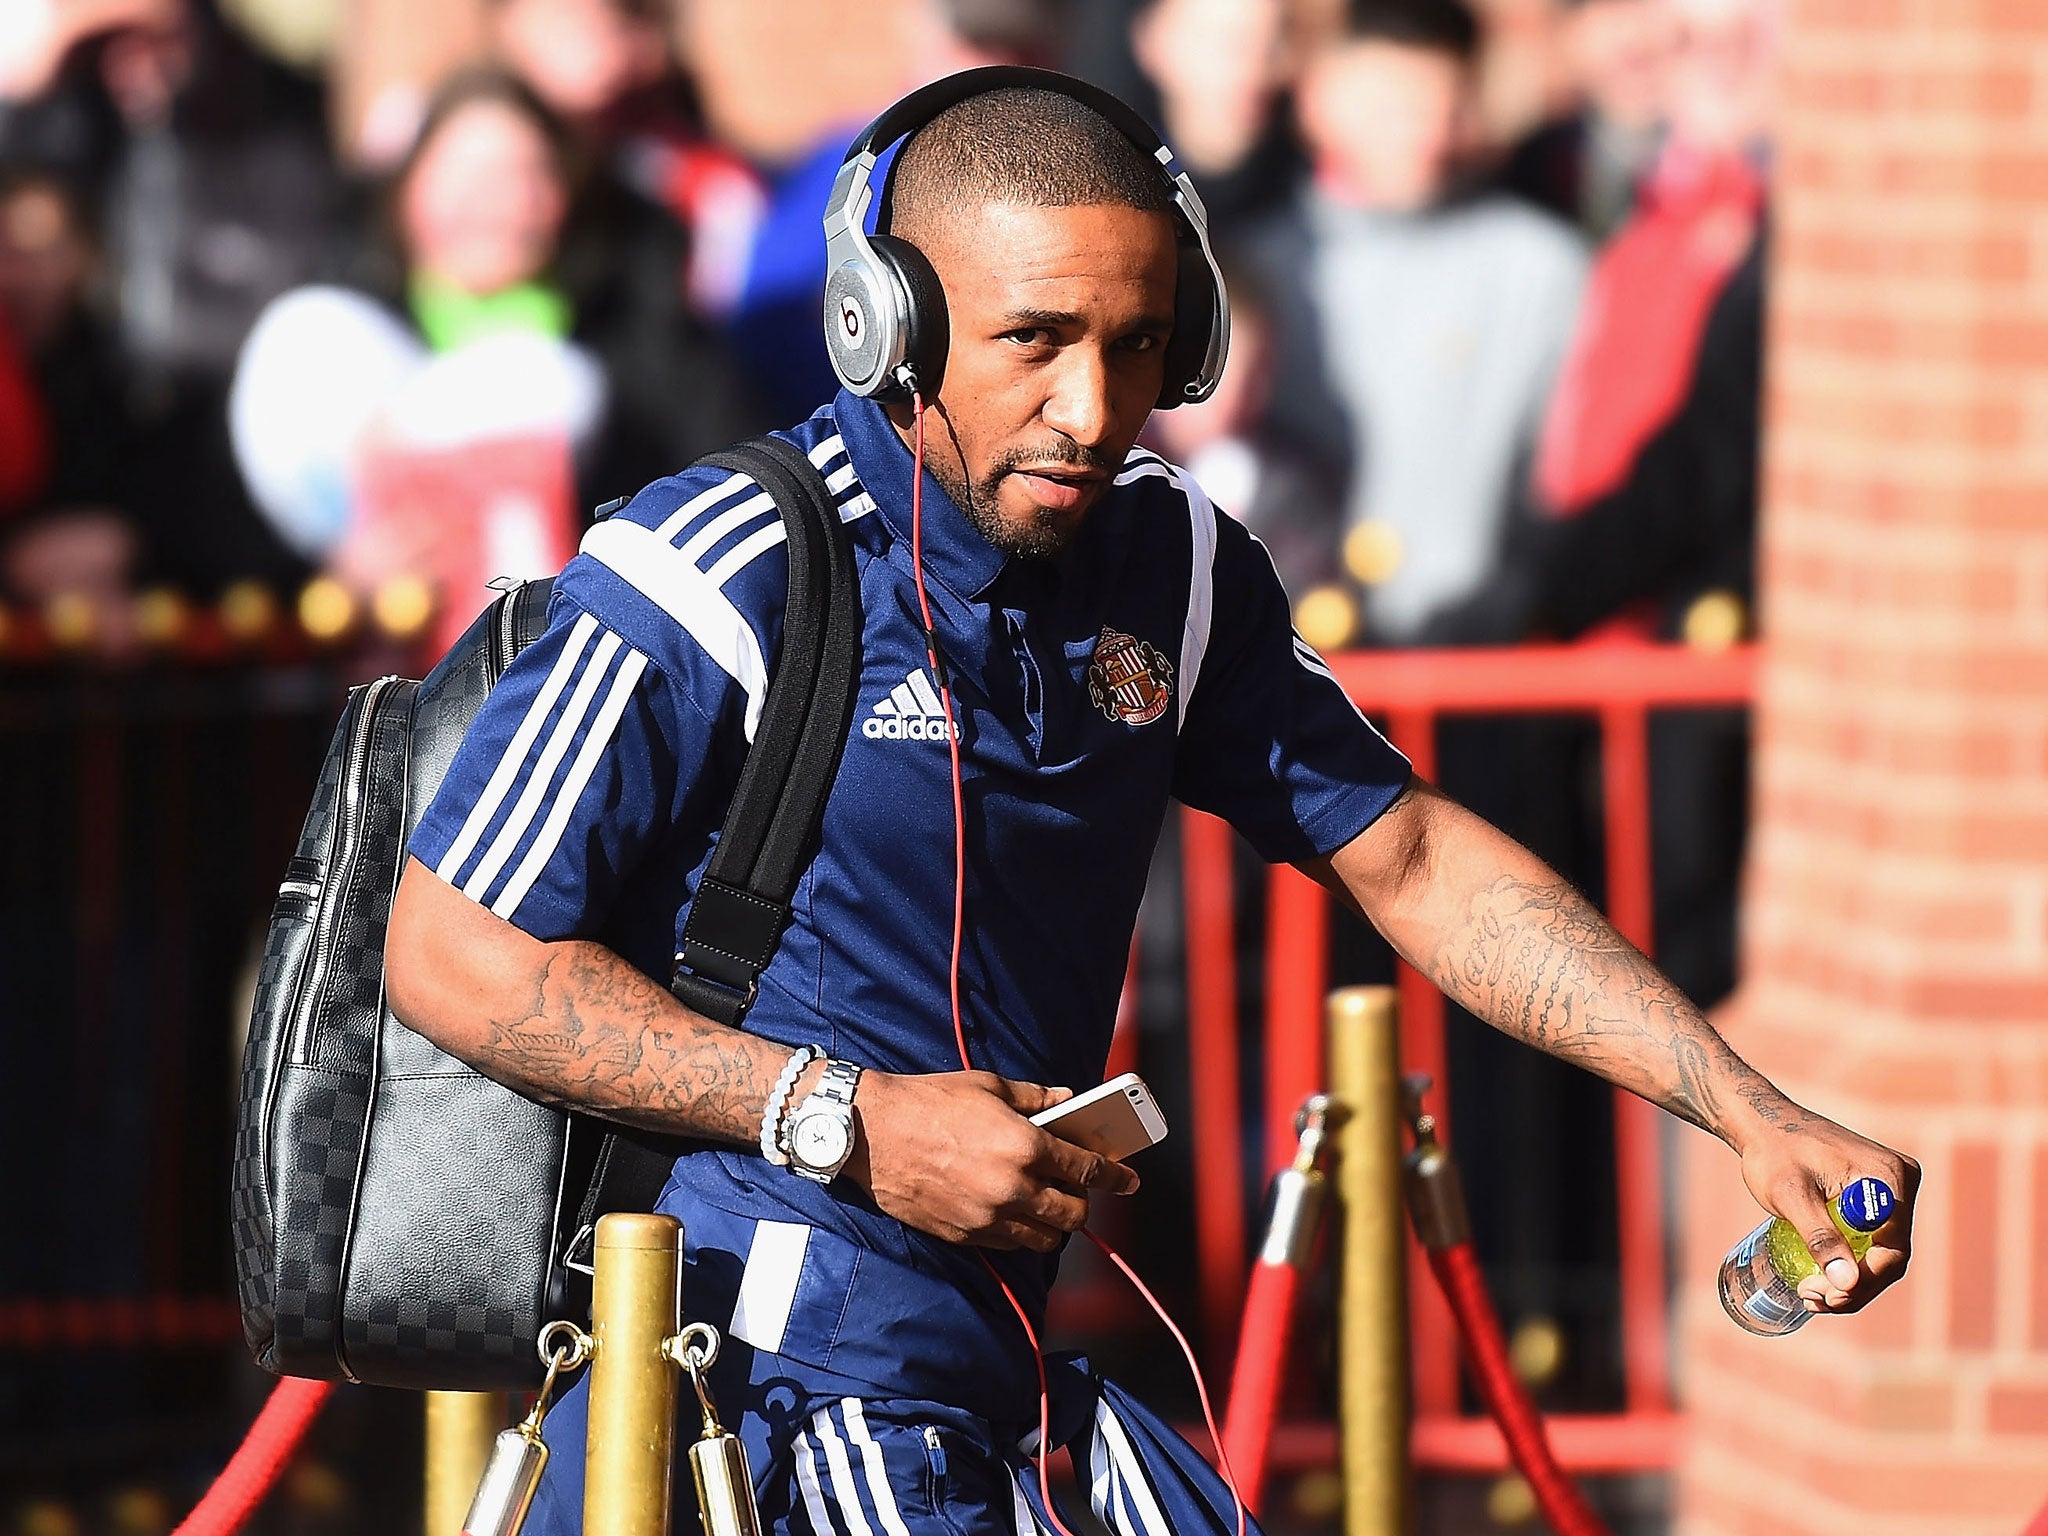 Jermain Defoe arrives for Sunderland's 1-1 draw with Swansea on Saturday - in which he went on to score in